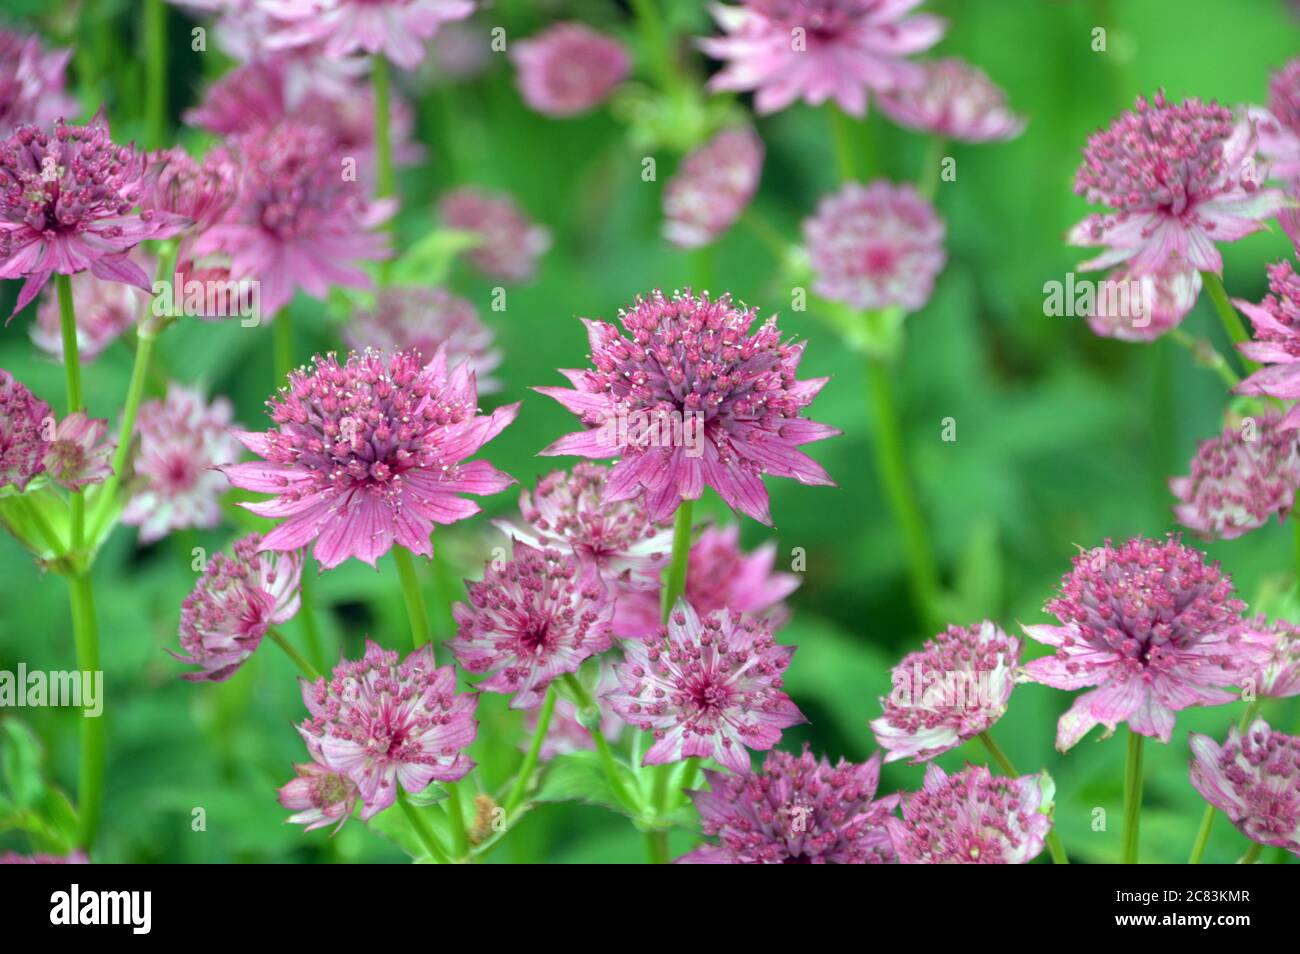 Candy-Pink Astrantia 'Roma' (Hattie's Pincushion or Masterwort) Flowers grown in a Border at RHS Garden Harlow Carr, Harrogate, Yorkshire. England, UK Stock Photo